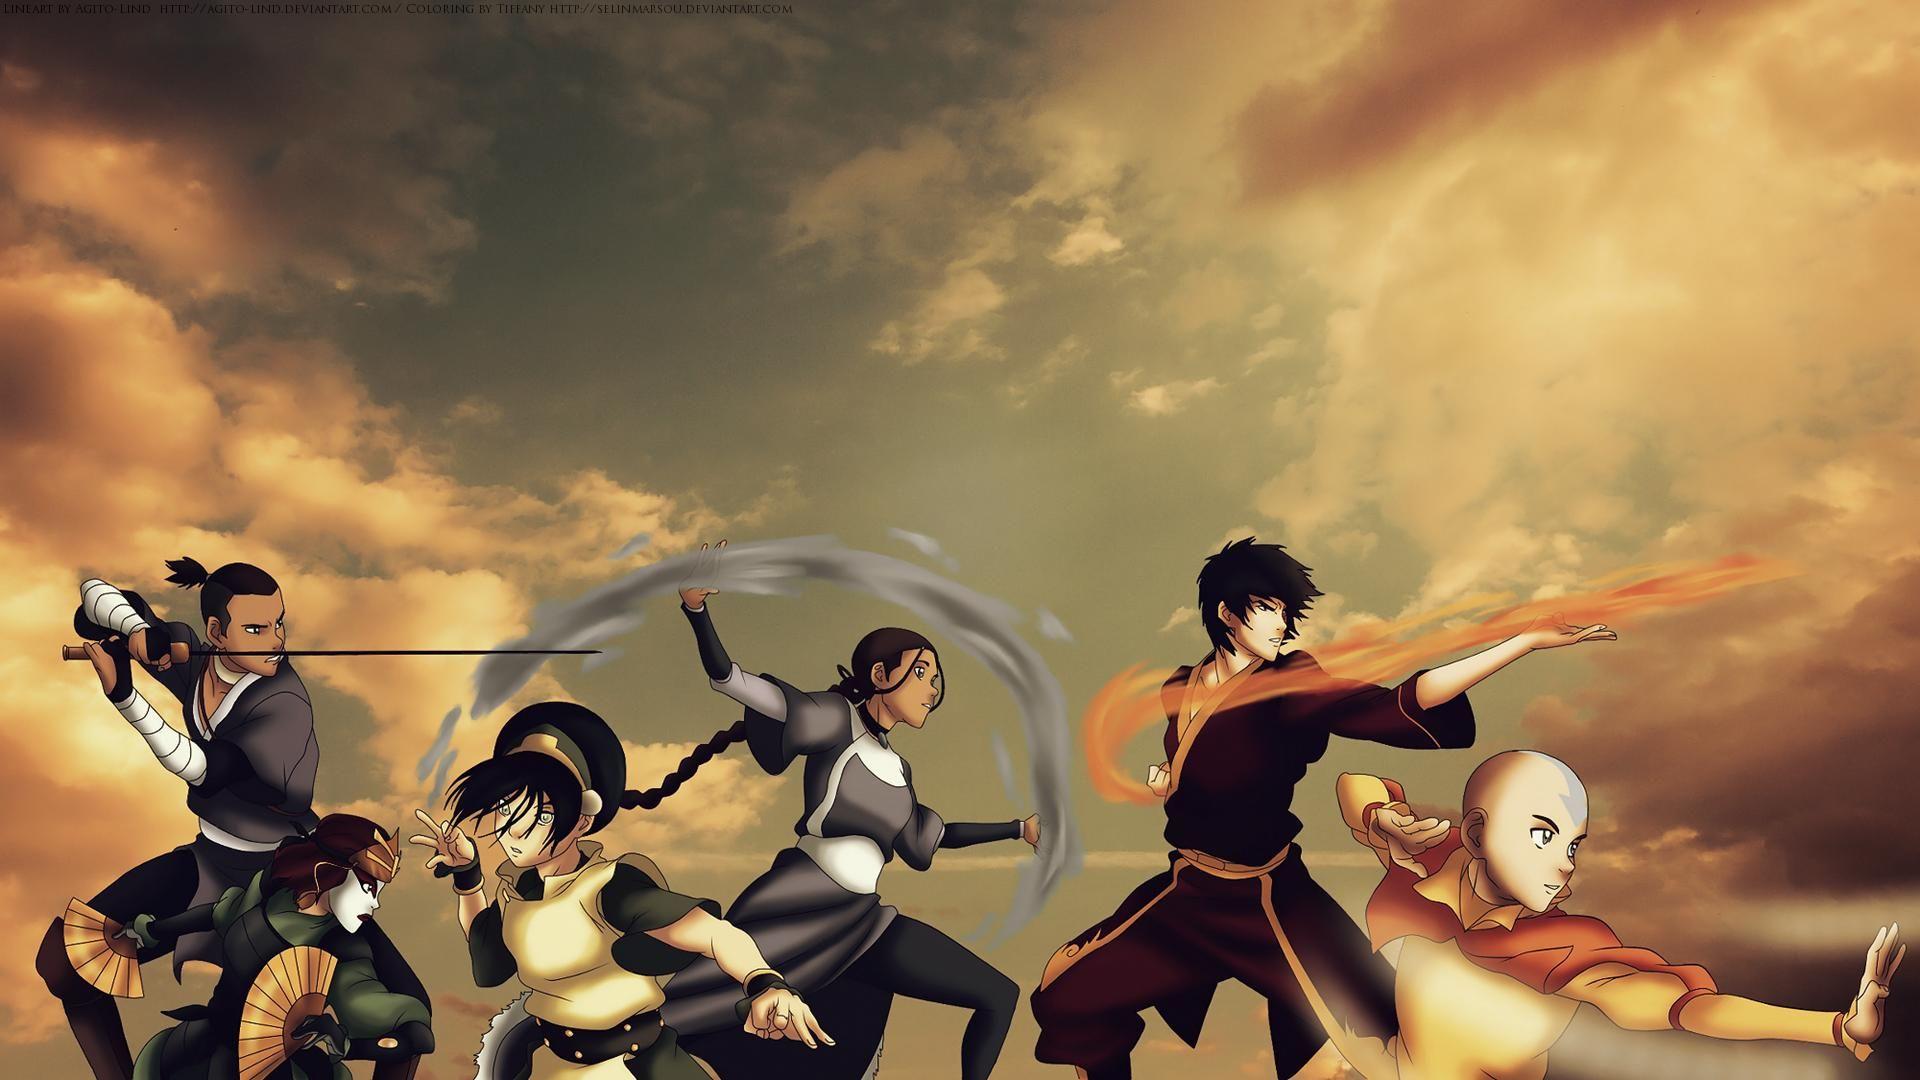 Avatar The Last Airbender Background. The last airbender, Avatar the last airbender, Avatar airbender